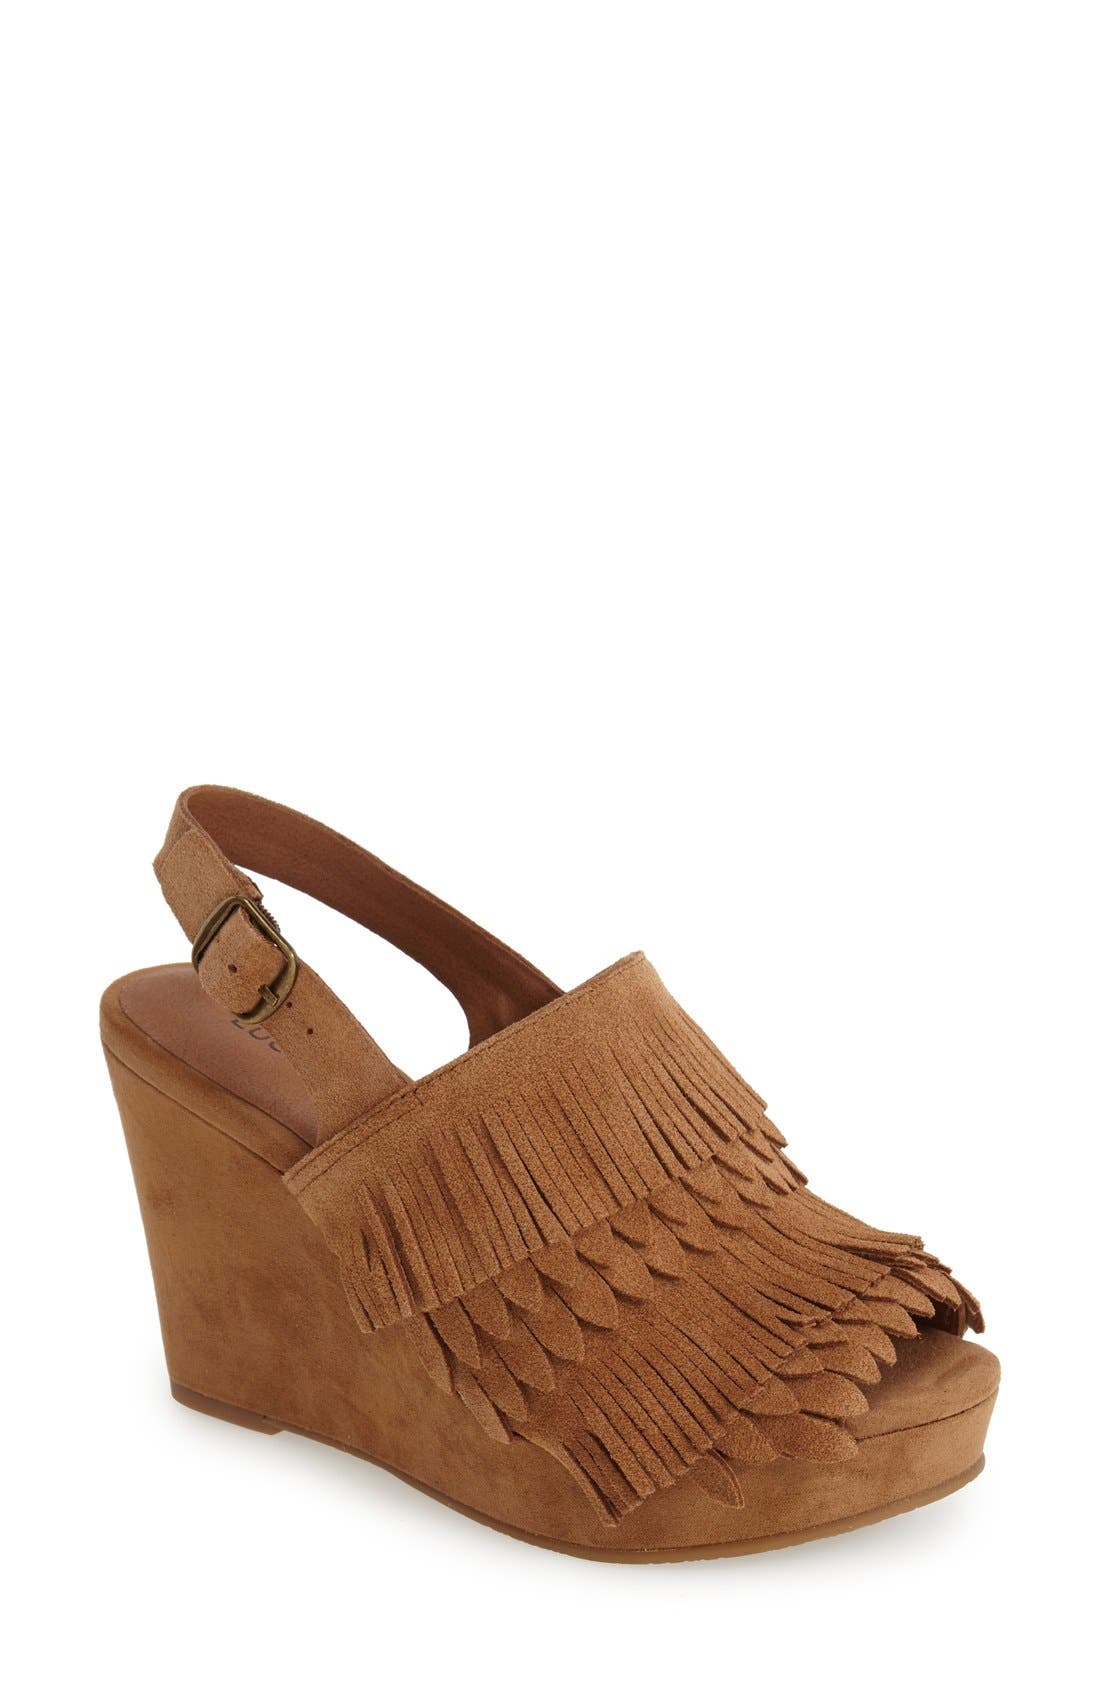 lucky brand booties with fringe